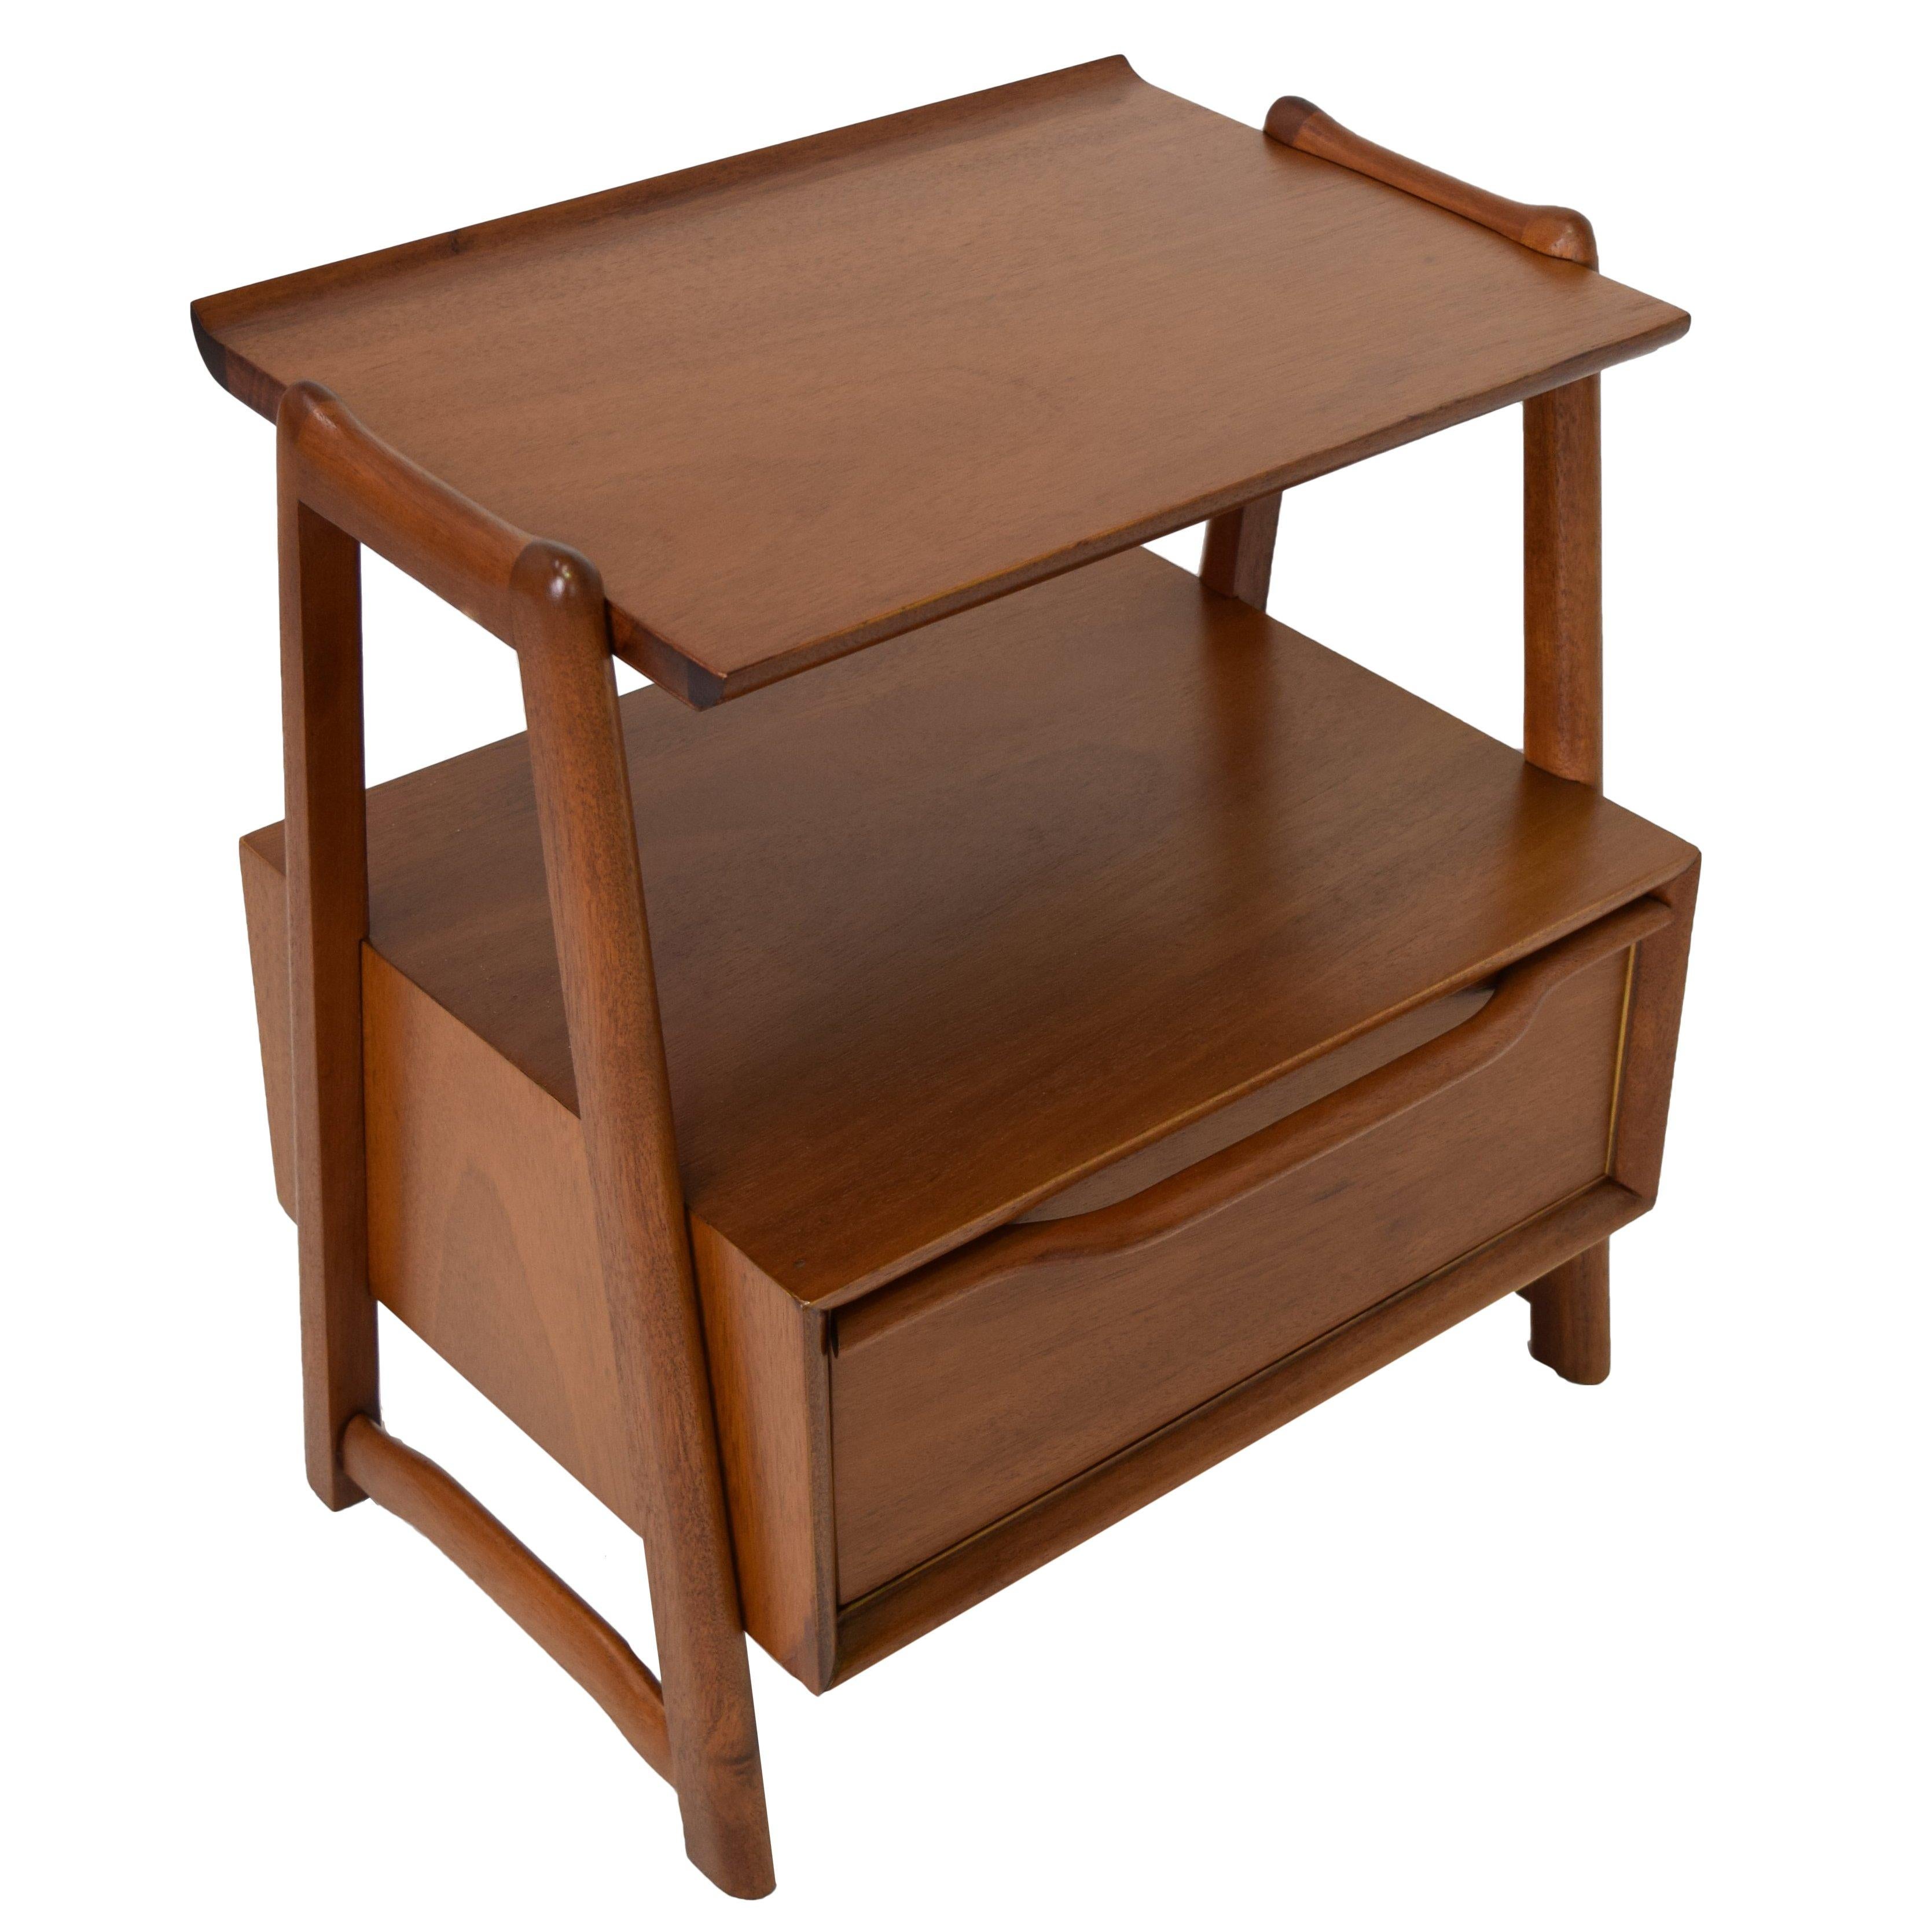 Hickory manufacturing, pair end table or nightstands with storage., 1952, mahogany model 5207, Measures: 21